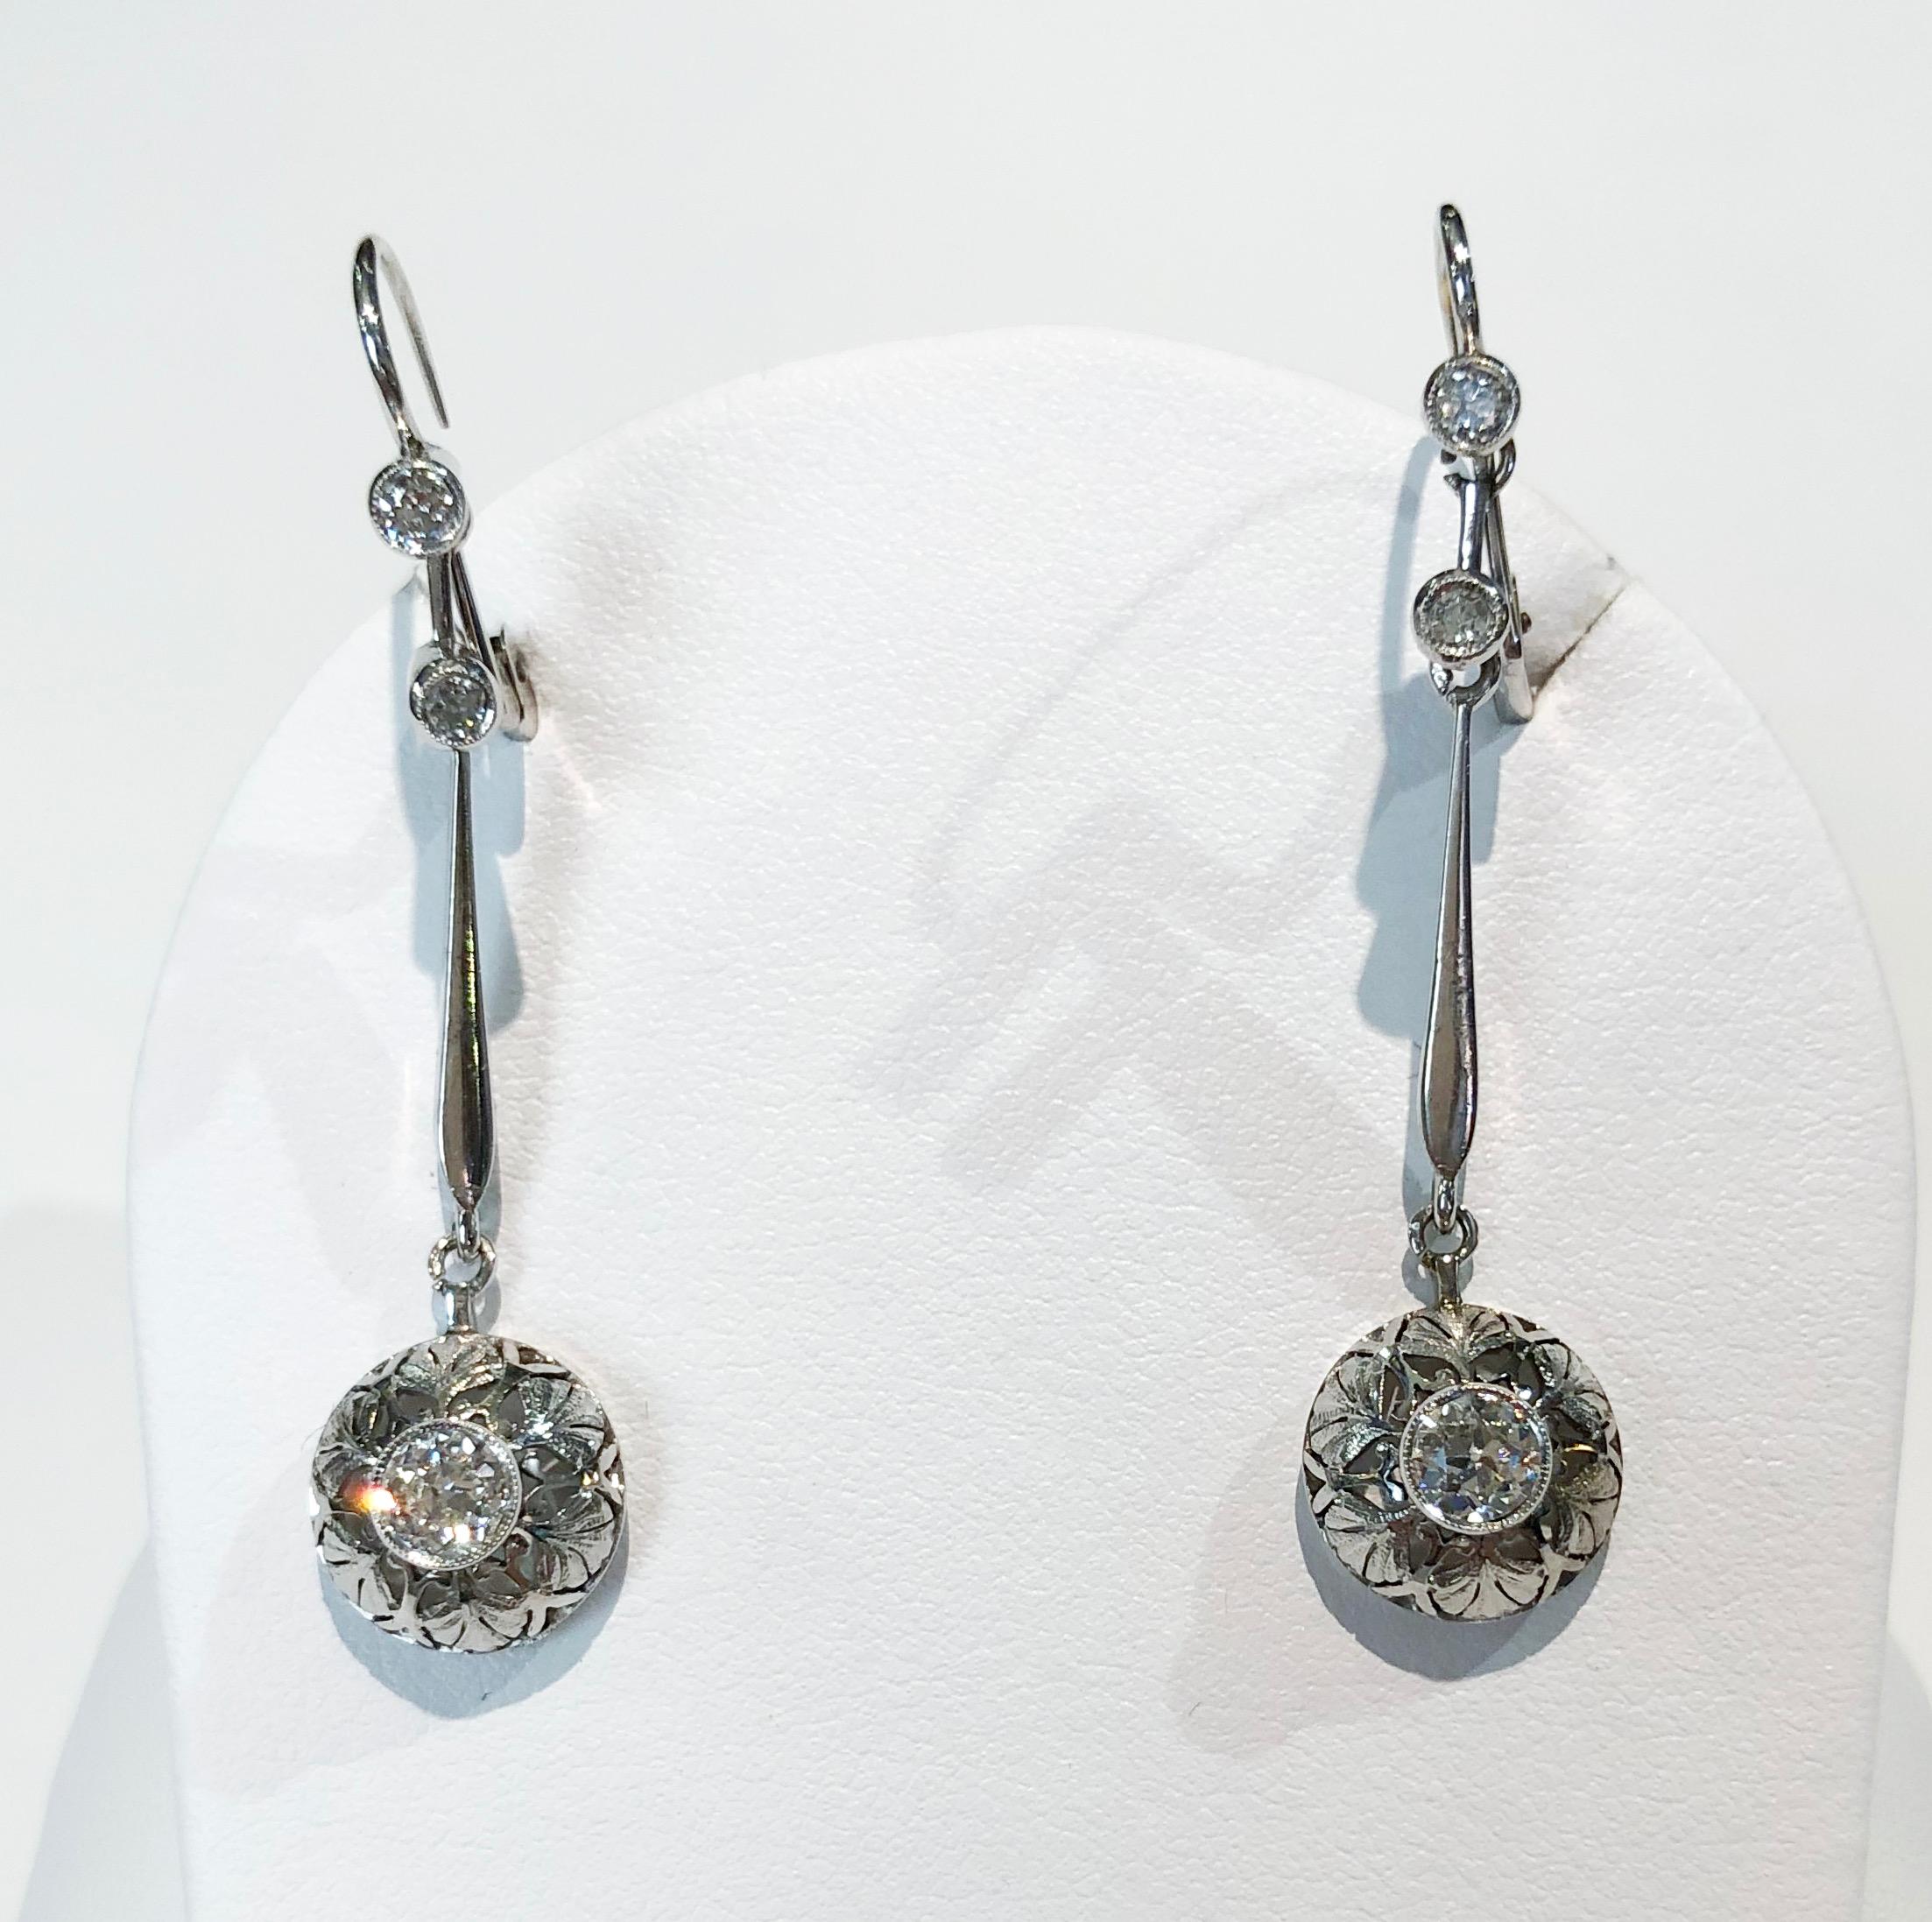 Pair of vintage earrings with 18 karat white gold and brilliant diamonds for a total of 0.5 karats, Italy 1920s-1930s
Length 5 cm